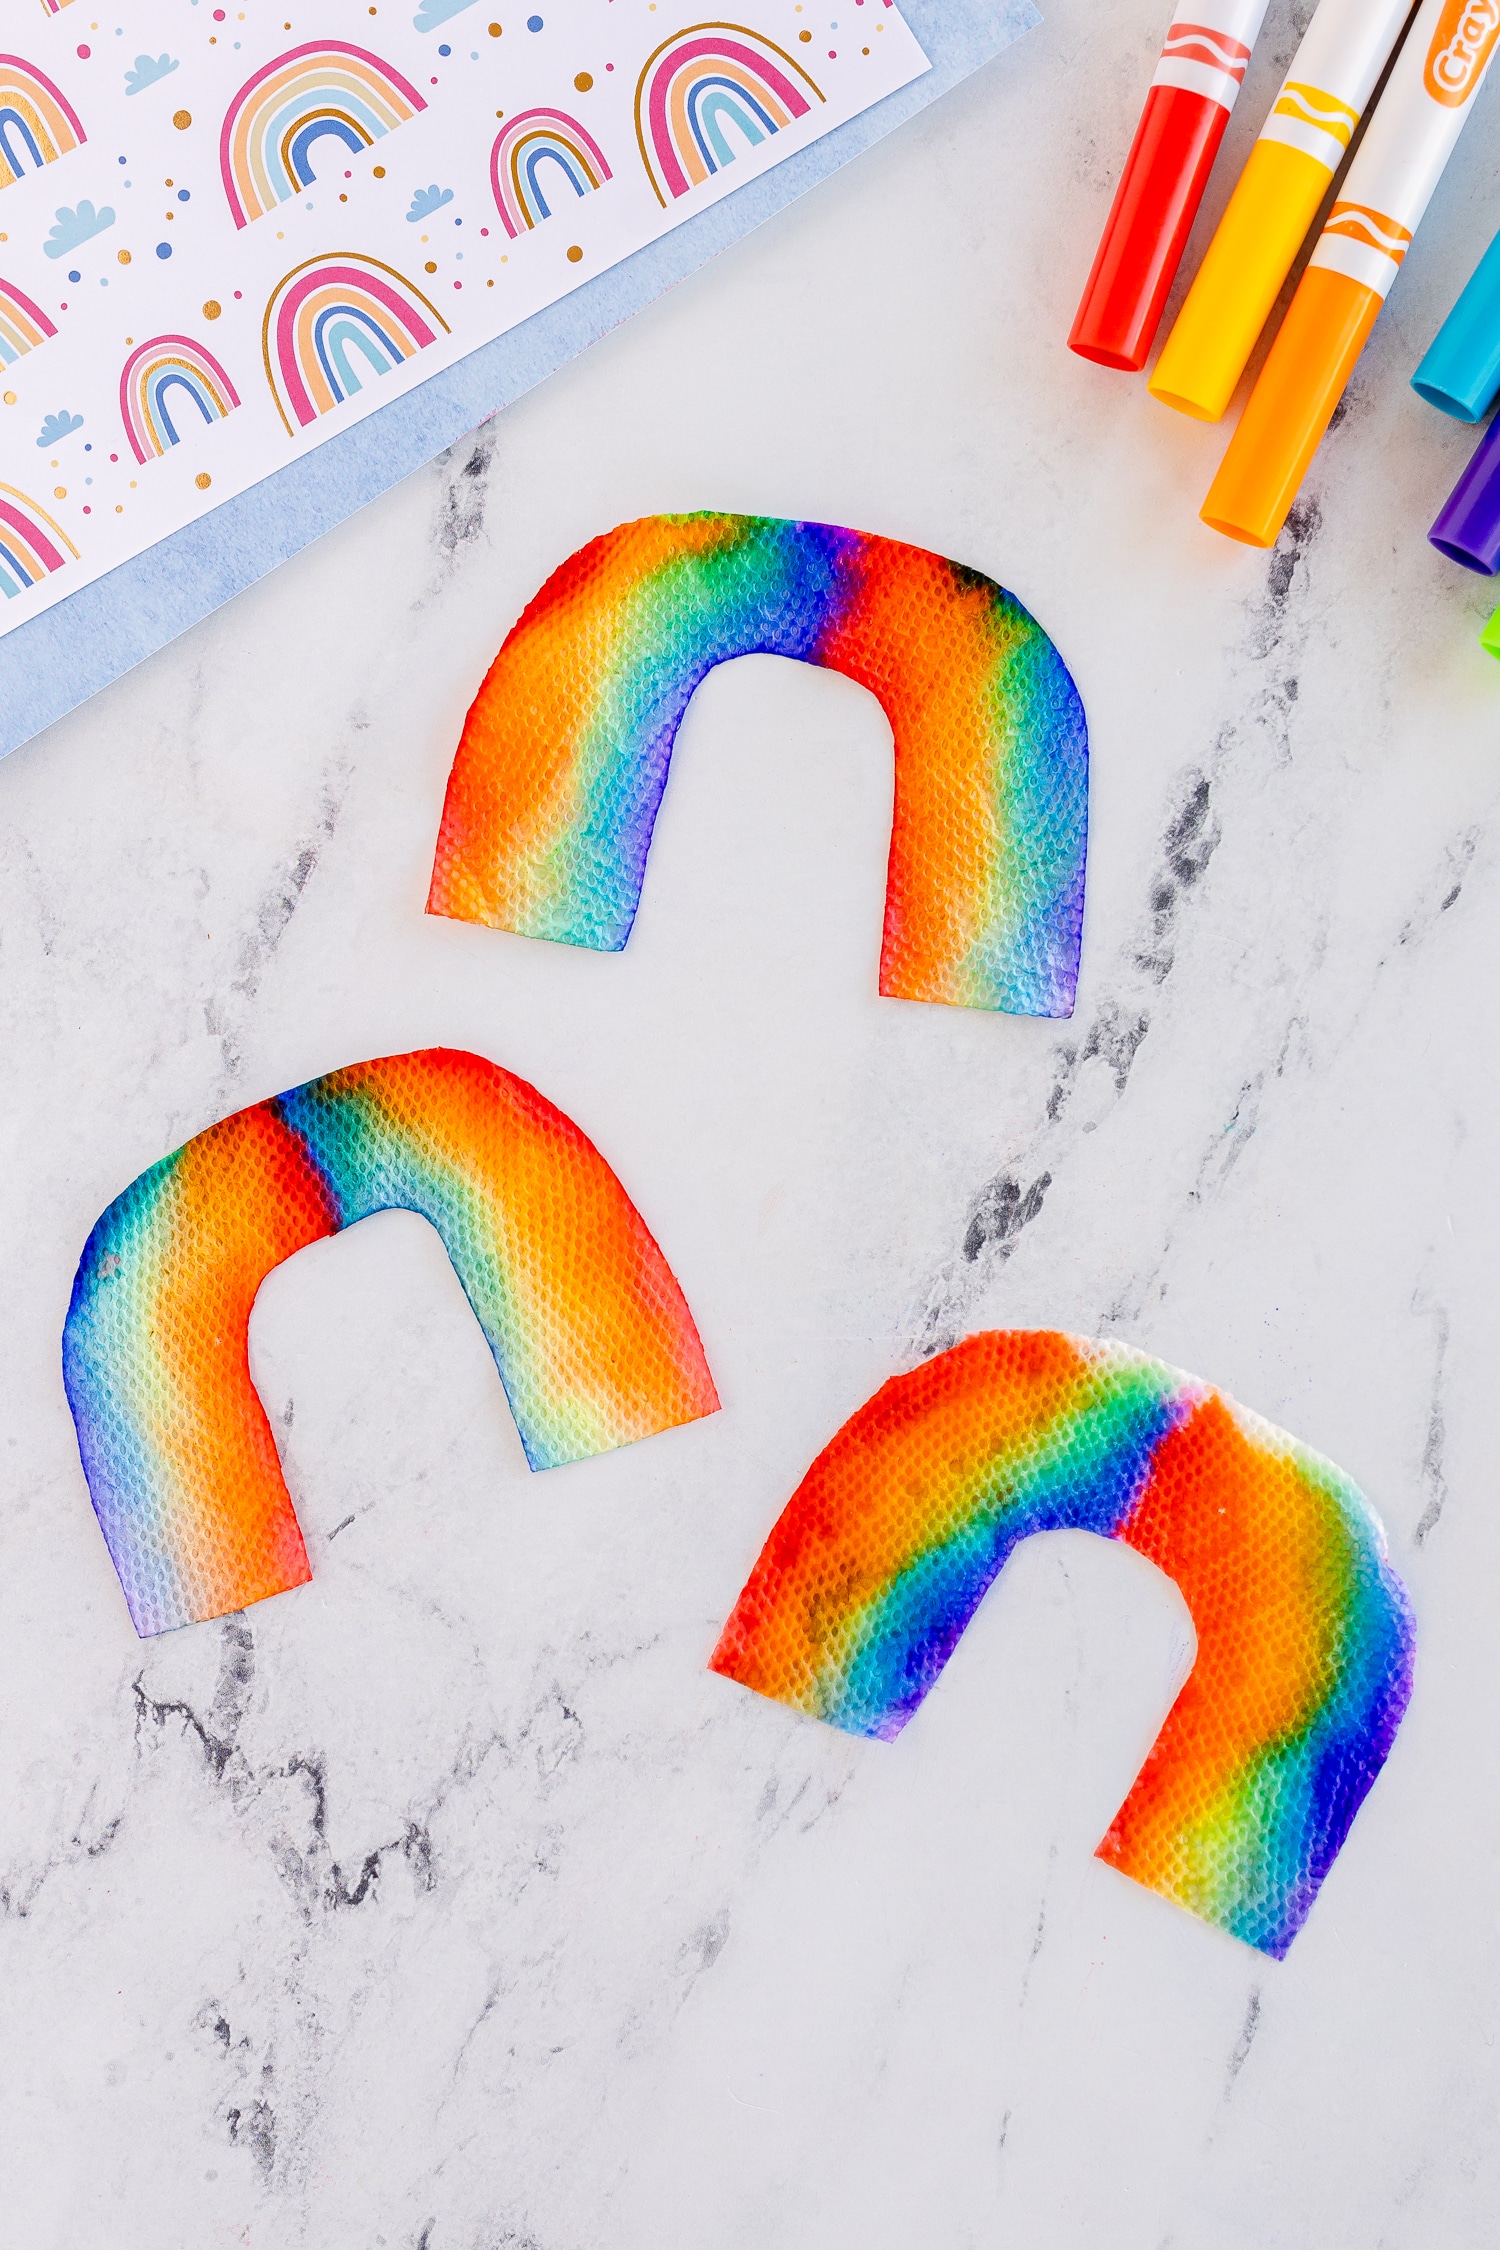 These colorful rainbows not only make fun experiments but nice spring decorations as well.